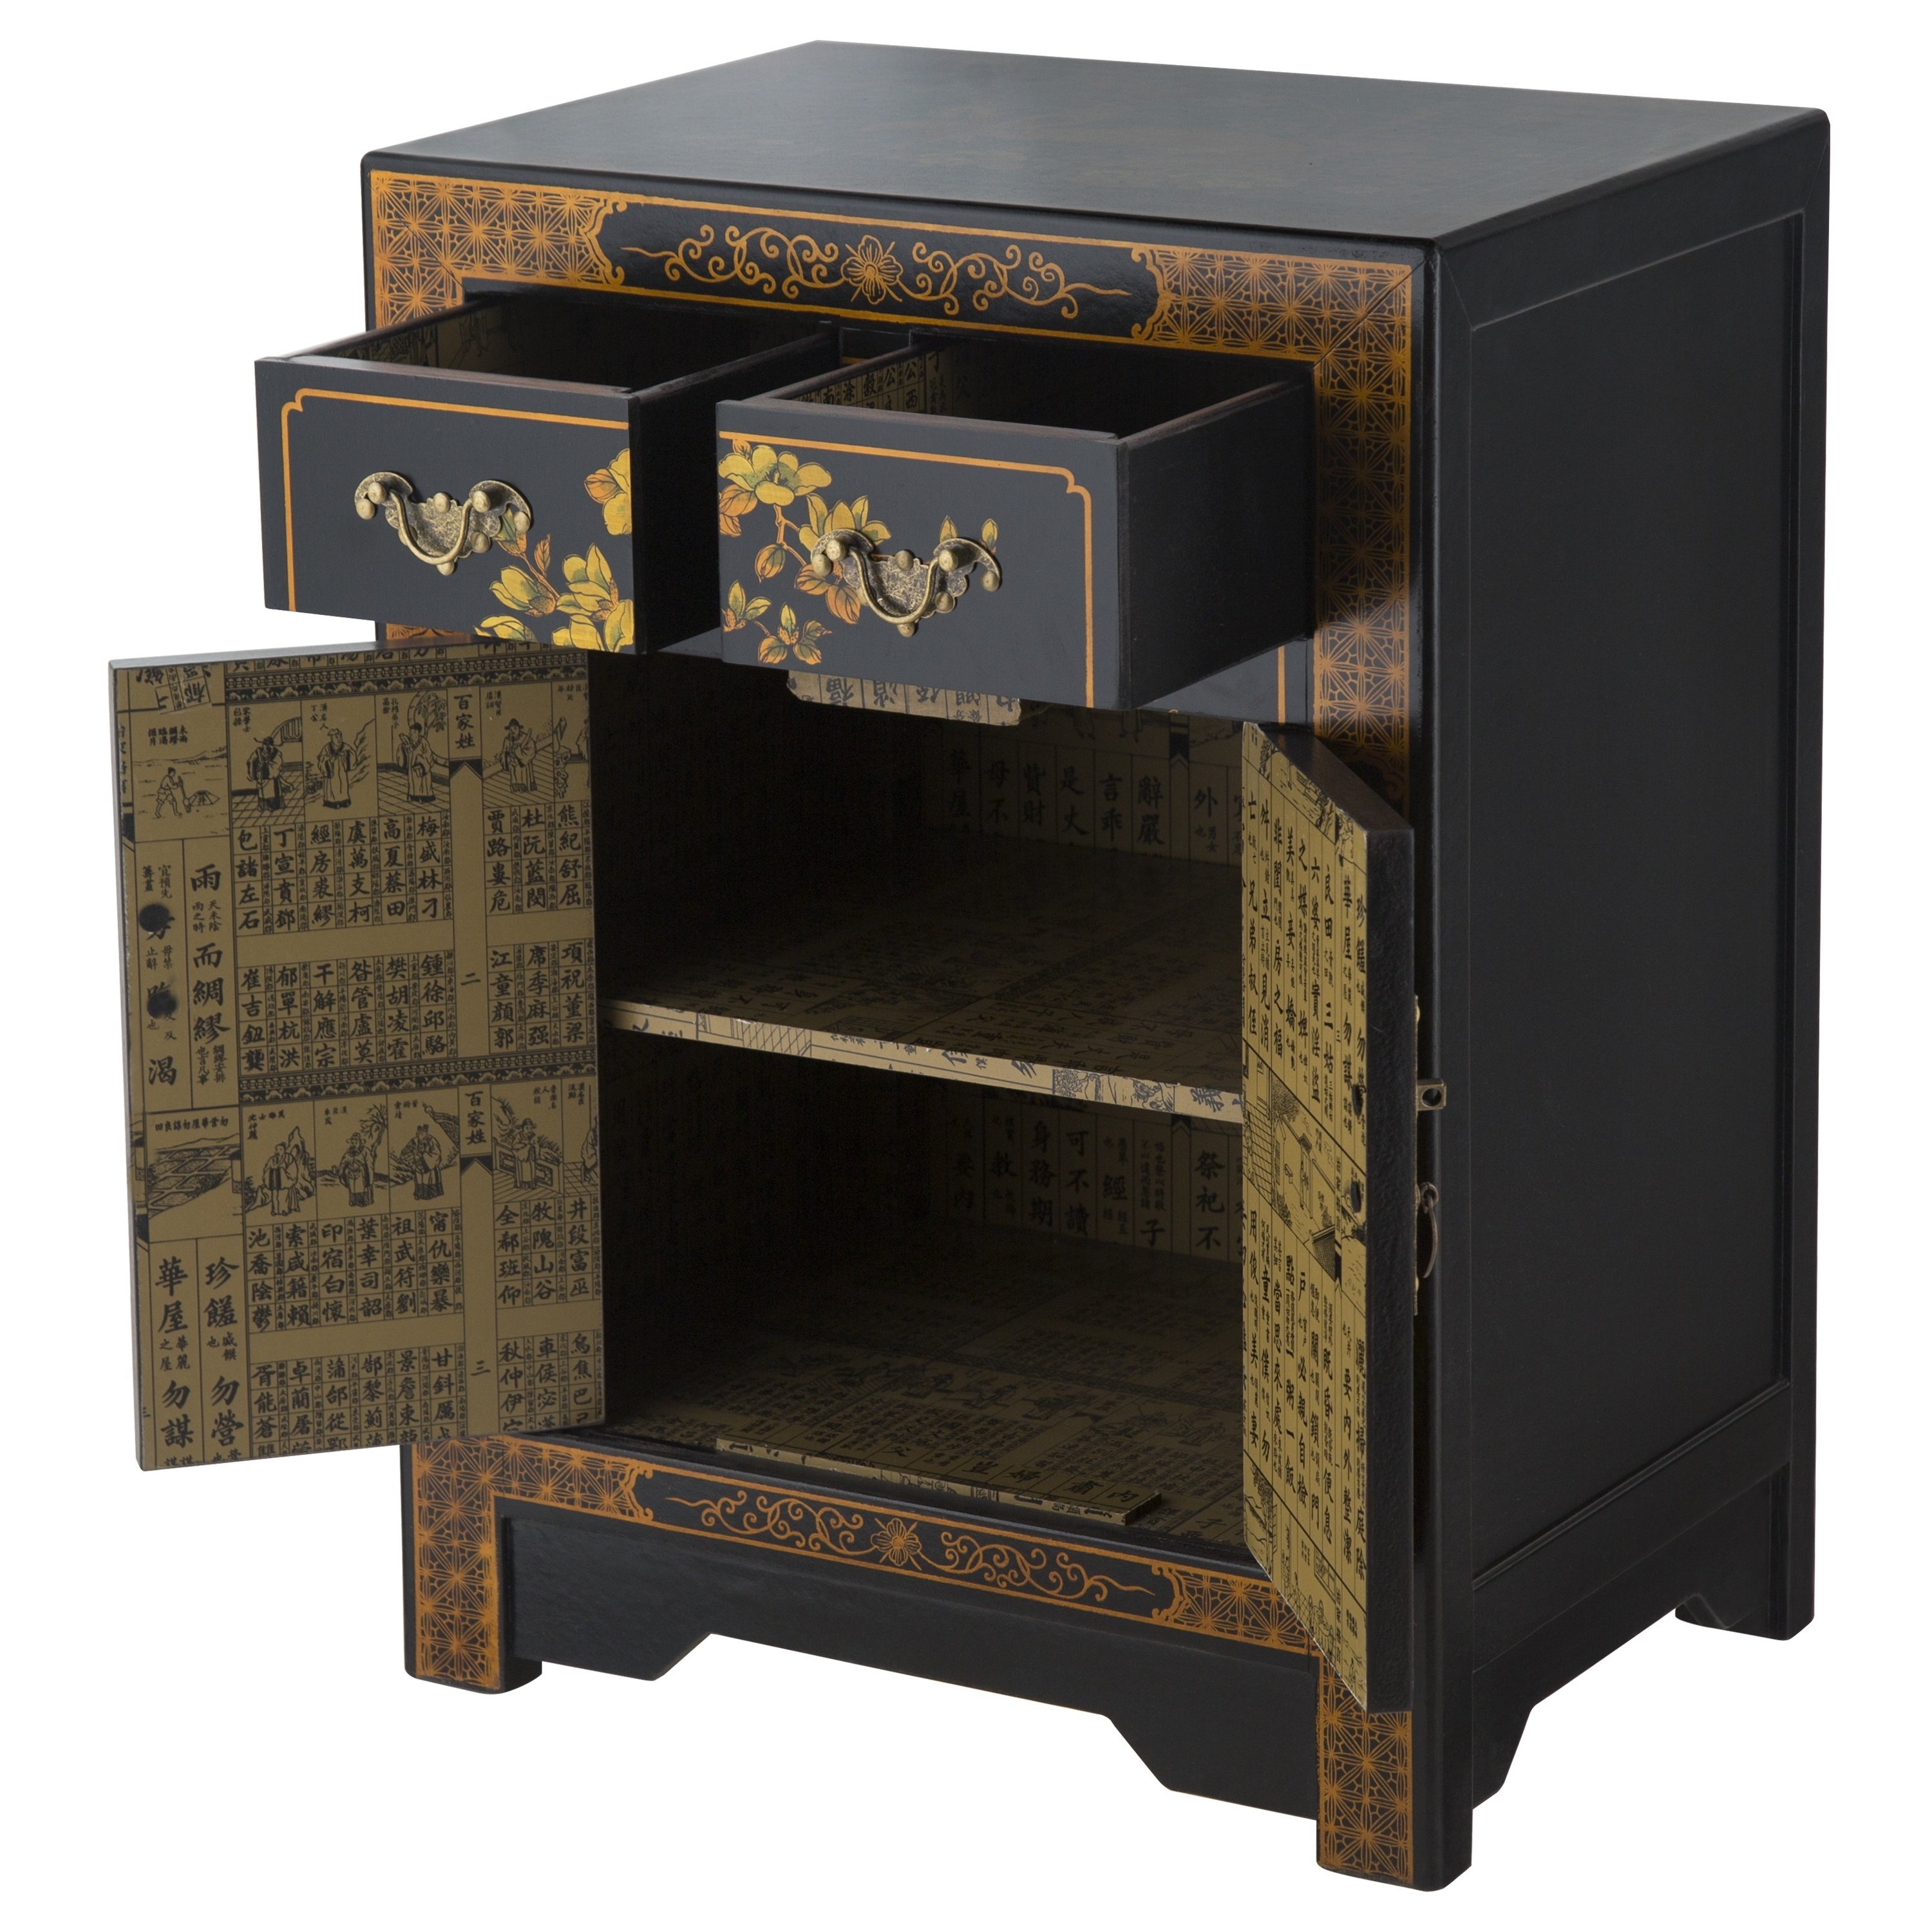 handmade nes black oriental nature motif end table furniture nightstand with motifs accent lamps free shipping today small square patio sets clearance jysk coffee bunnings trestle